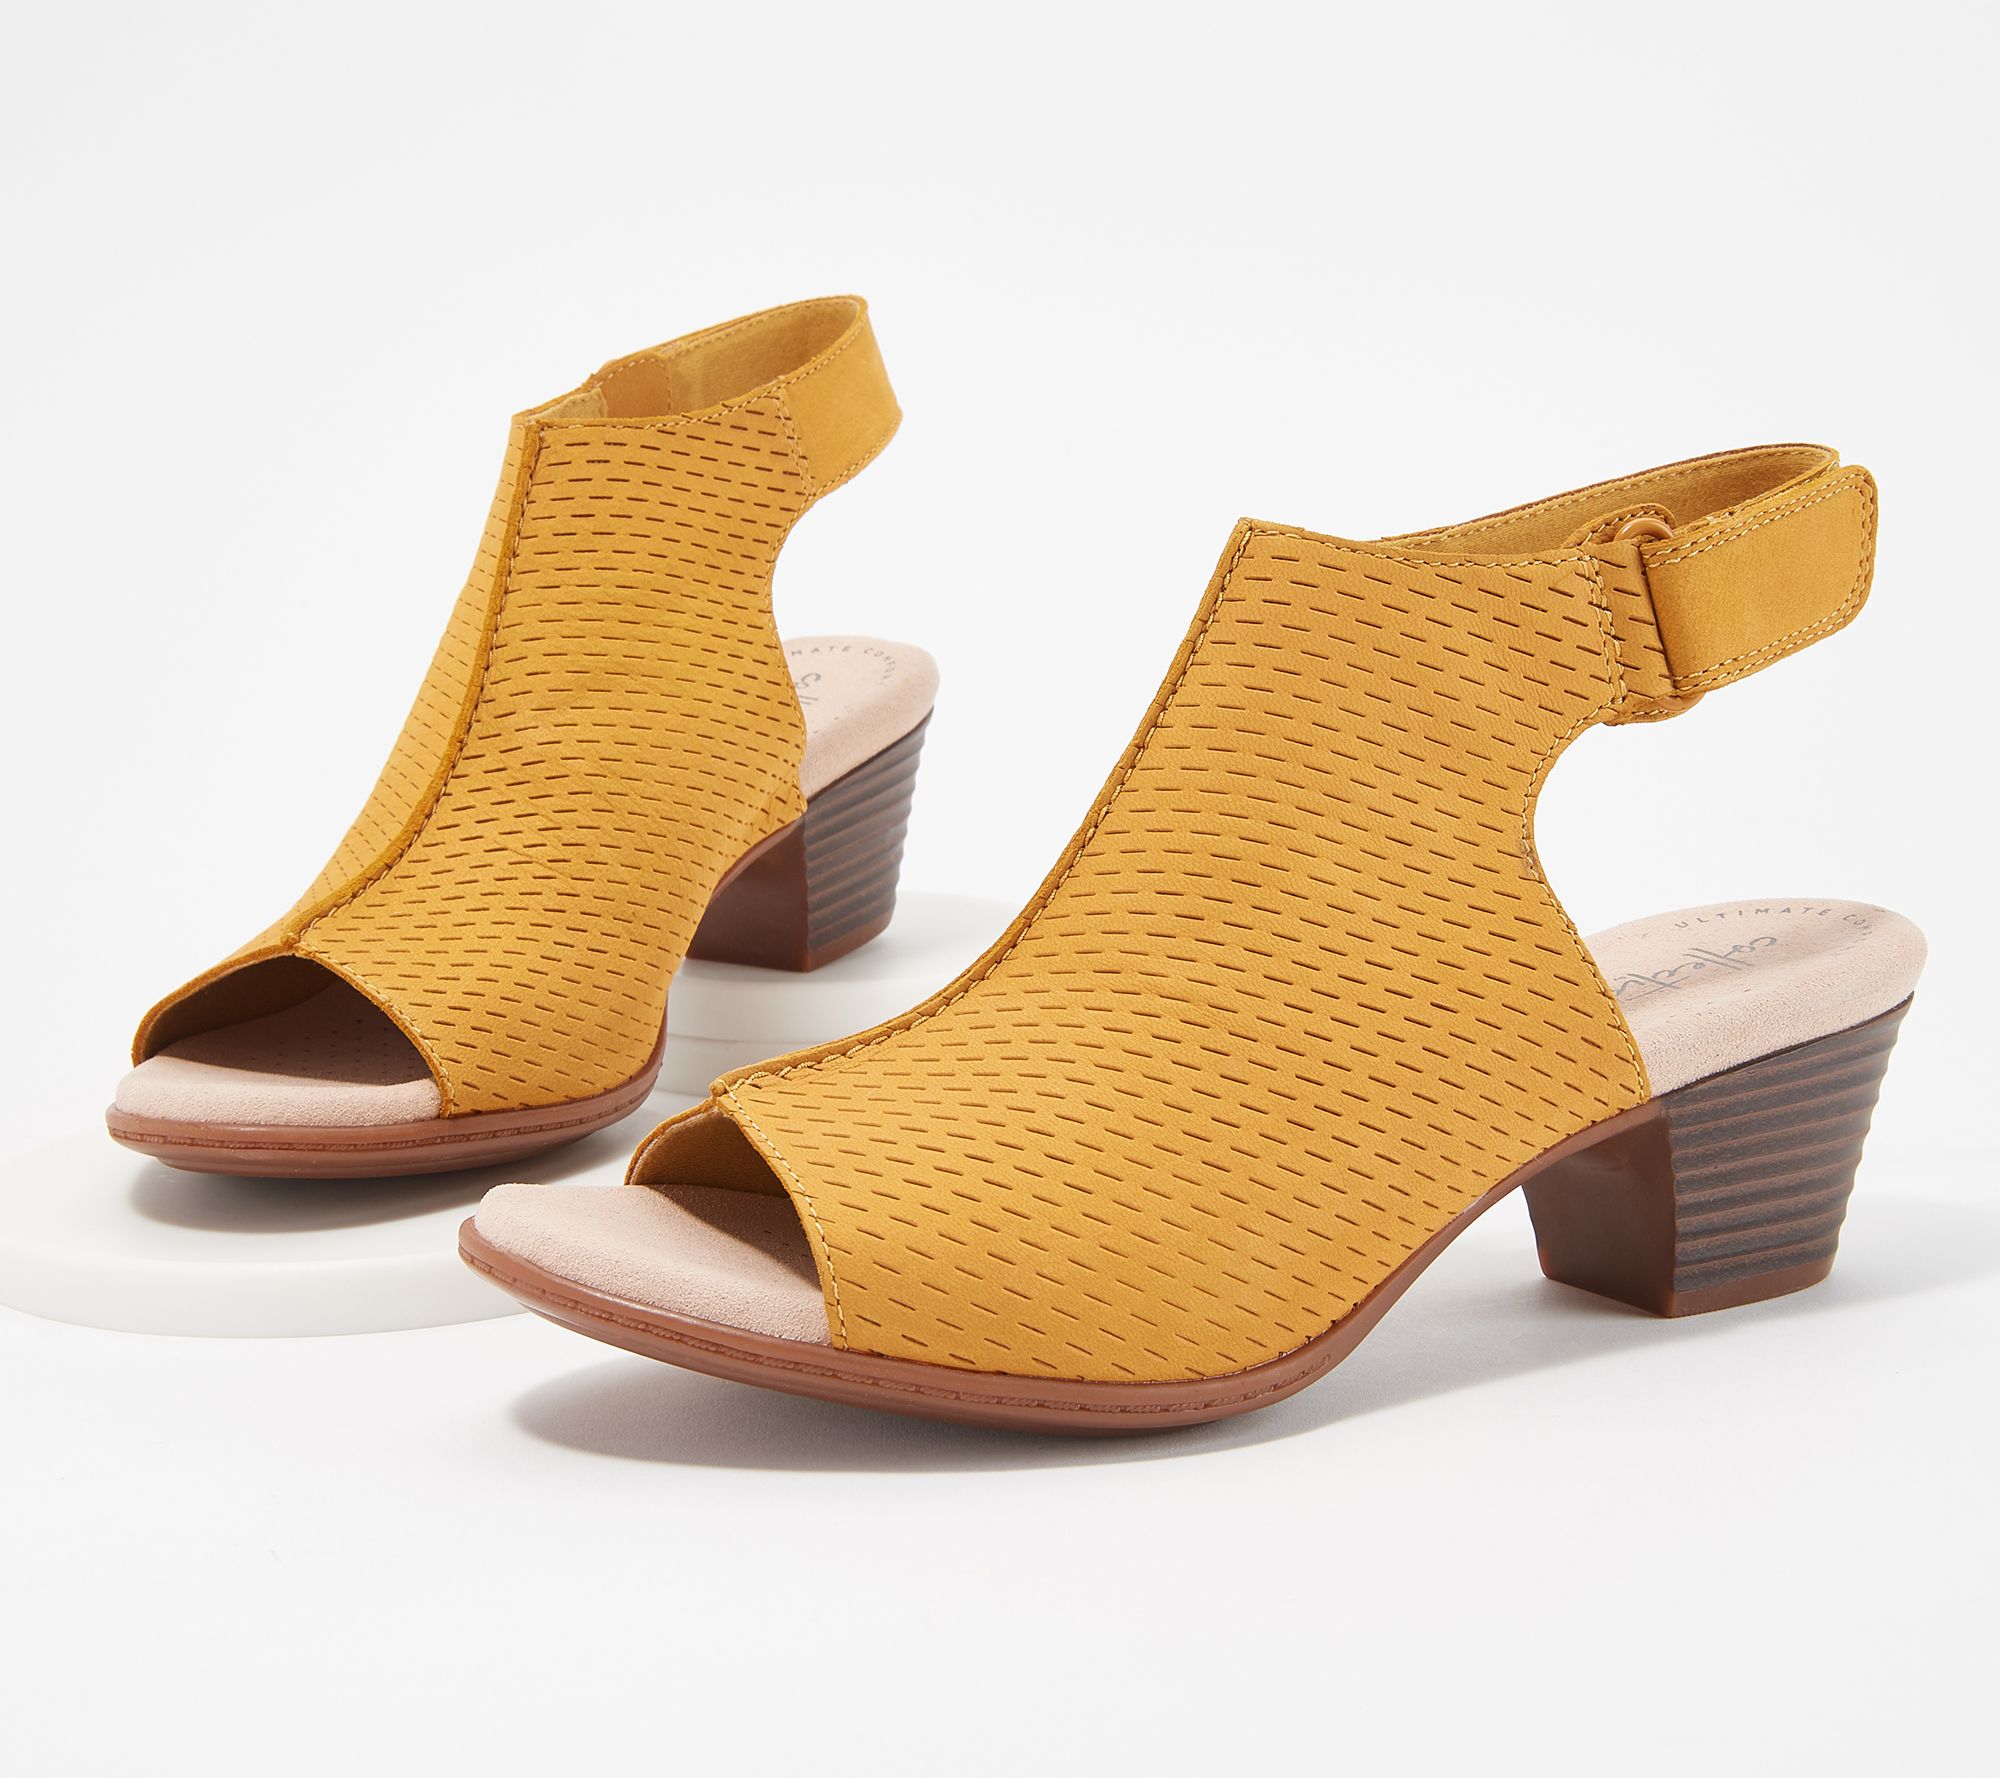 clarks nubuck leather perforated wedges